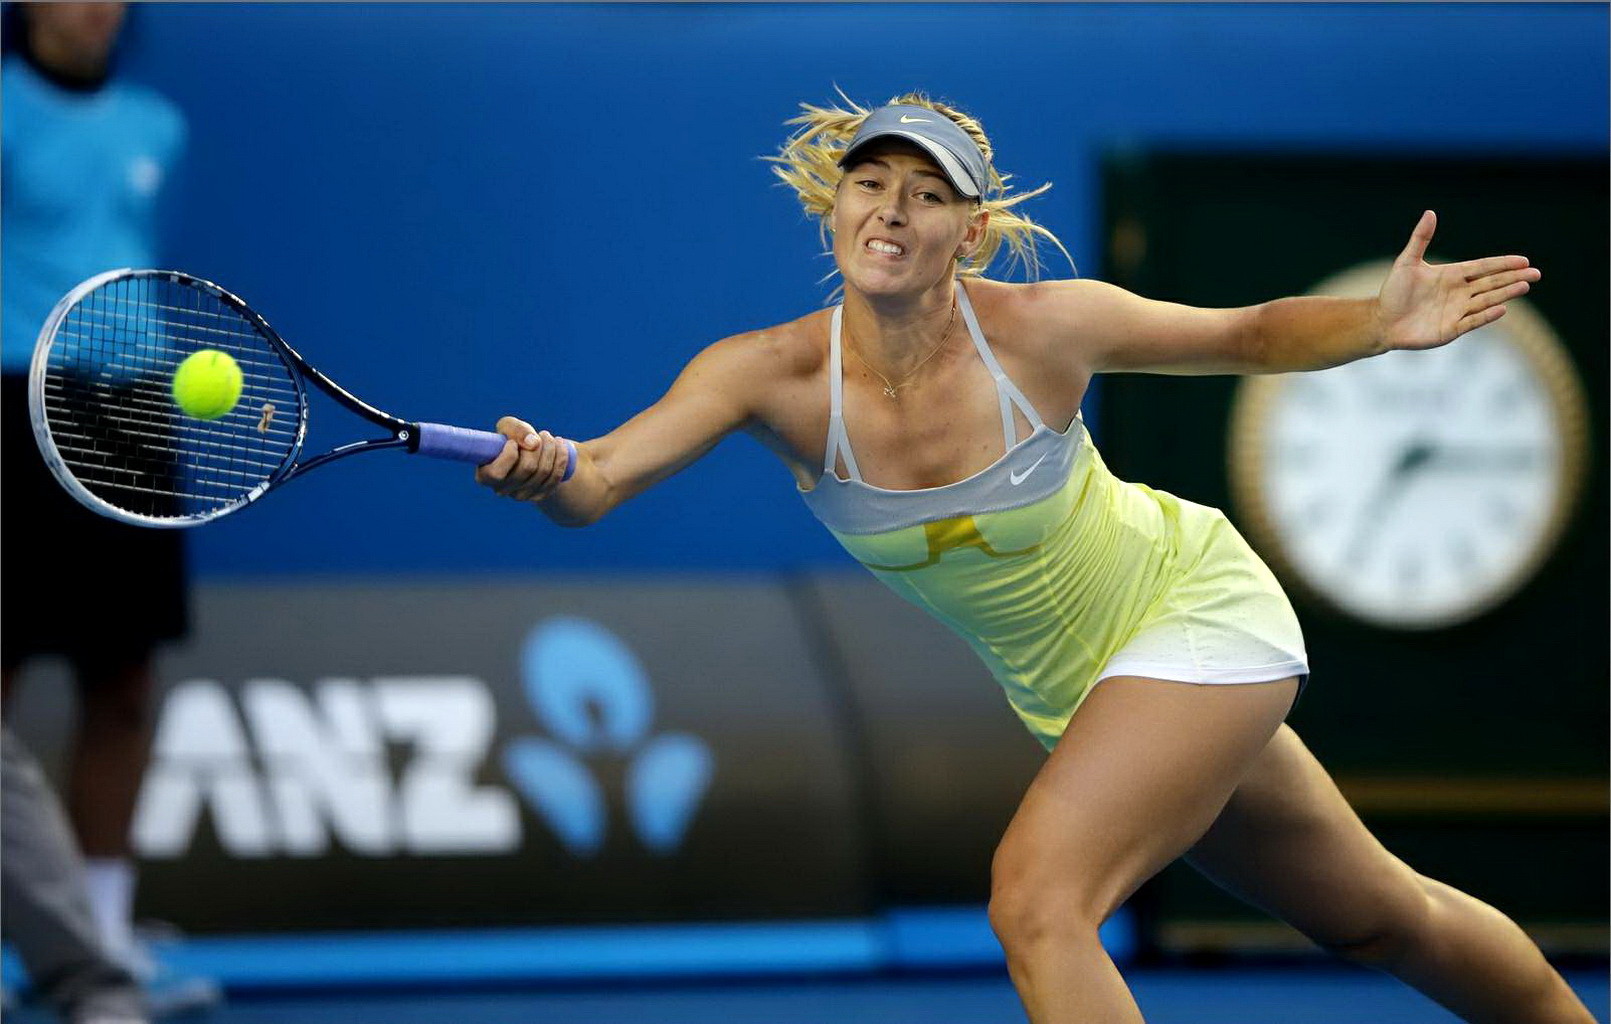 Maria Sharapova flashing her panties at the Australian Open in Melbourne #75243481